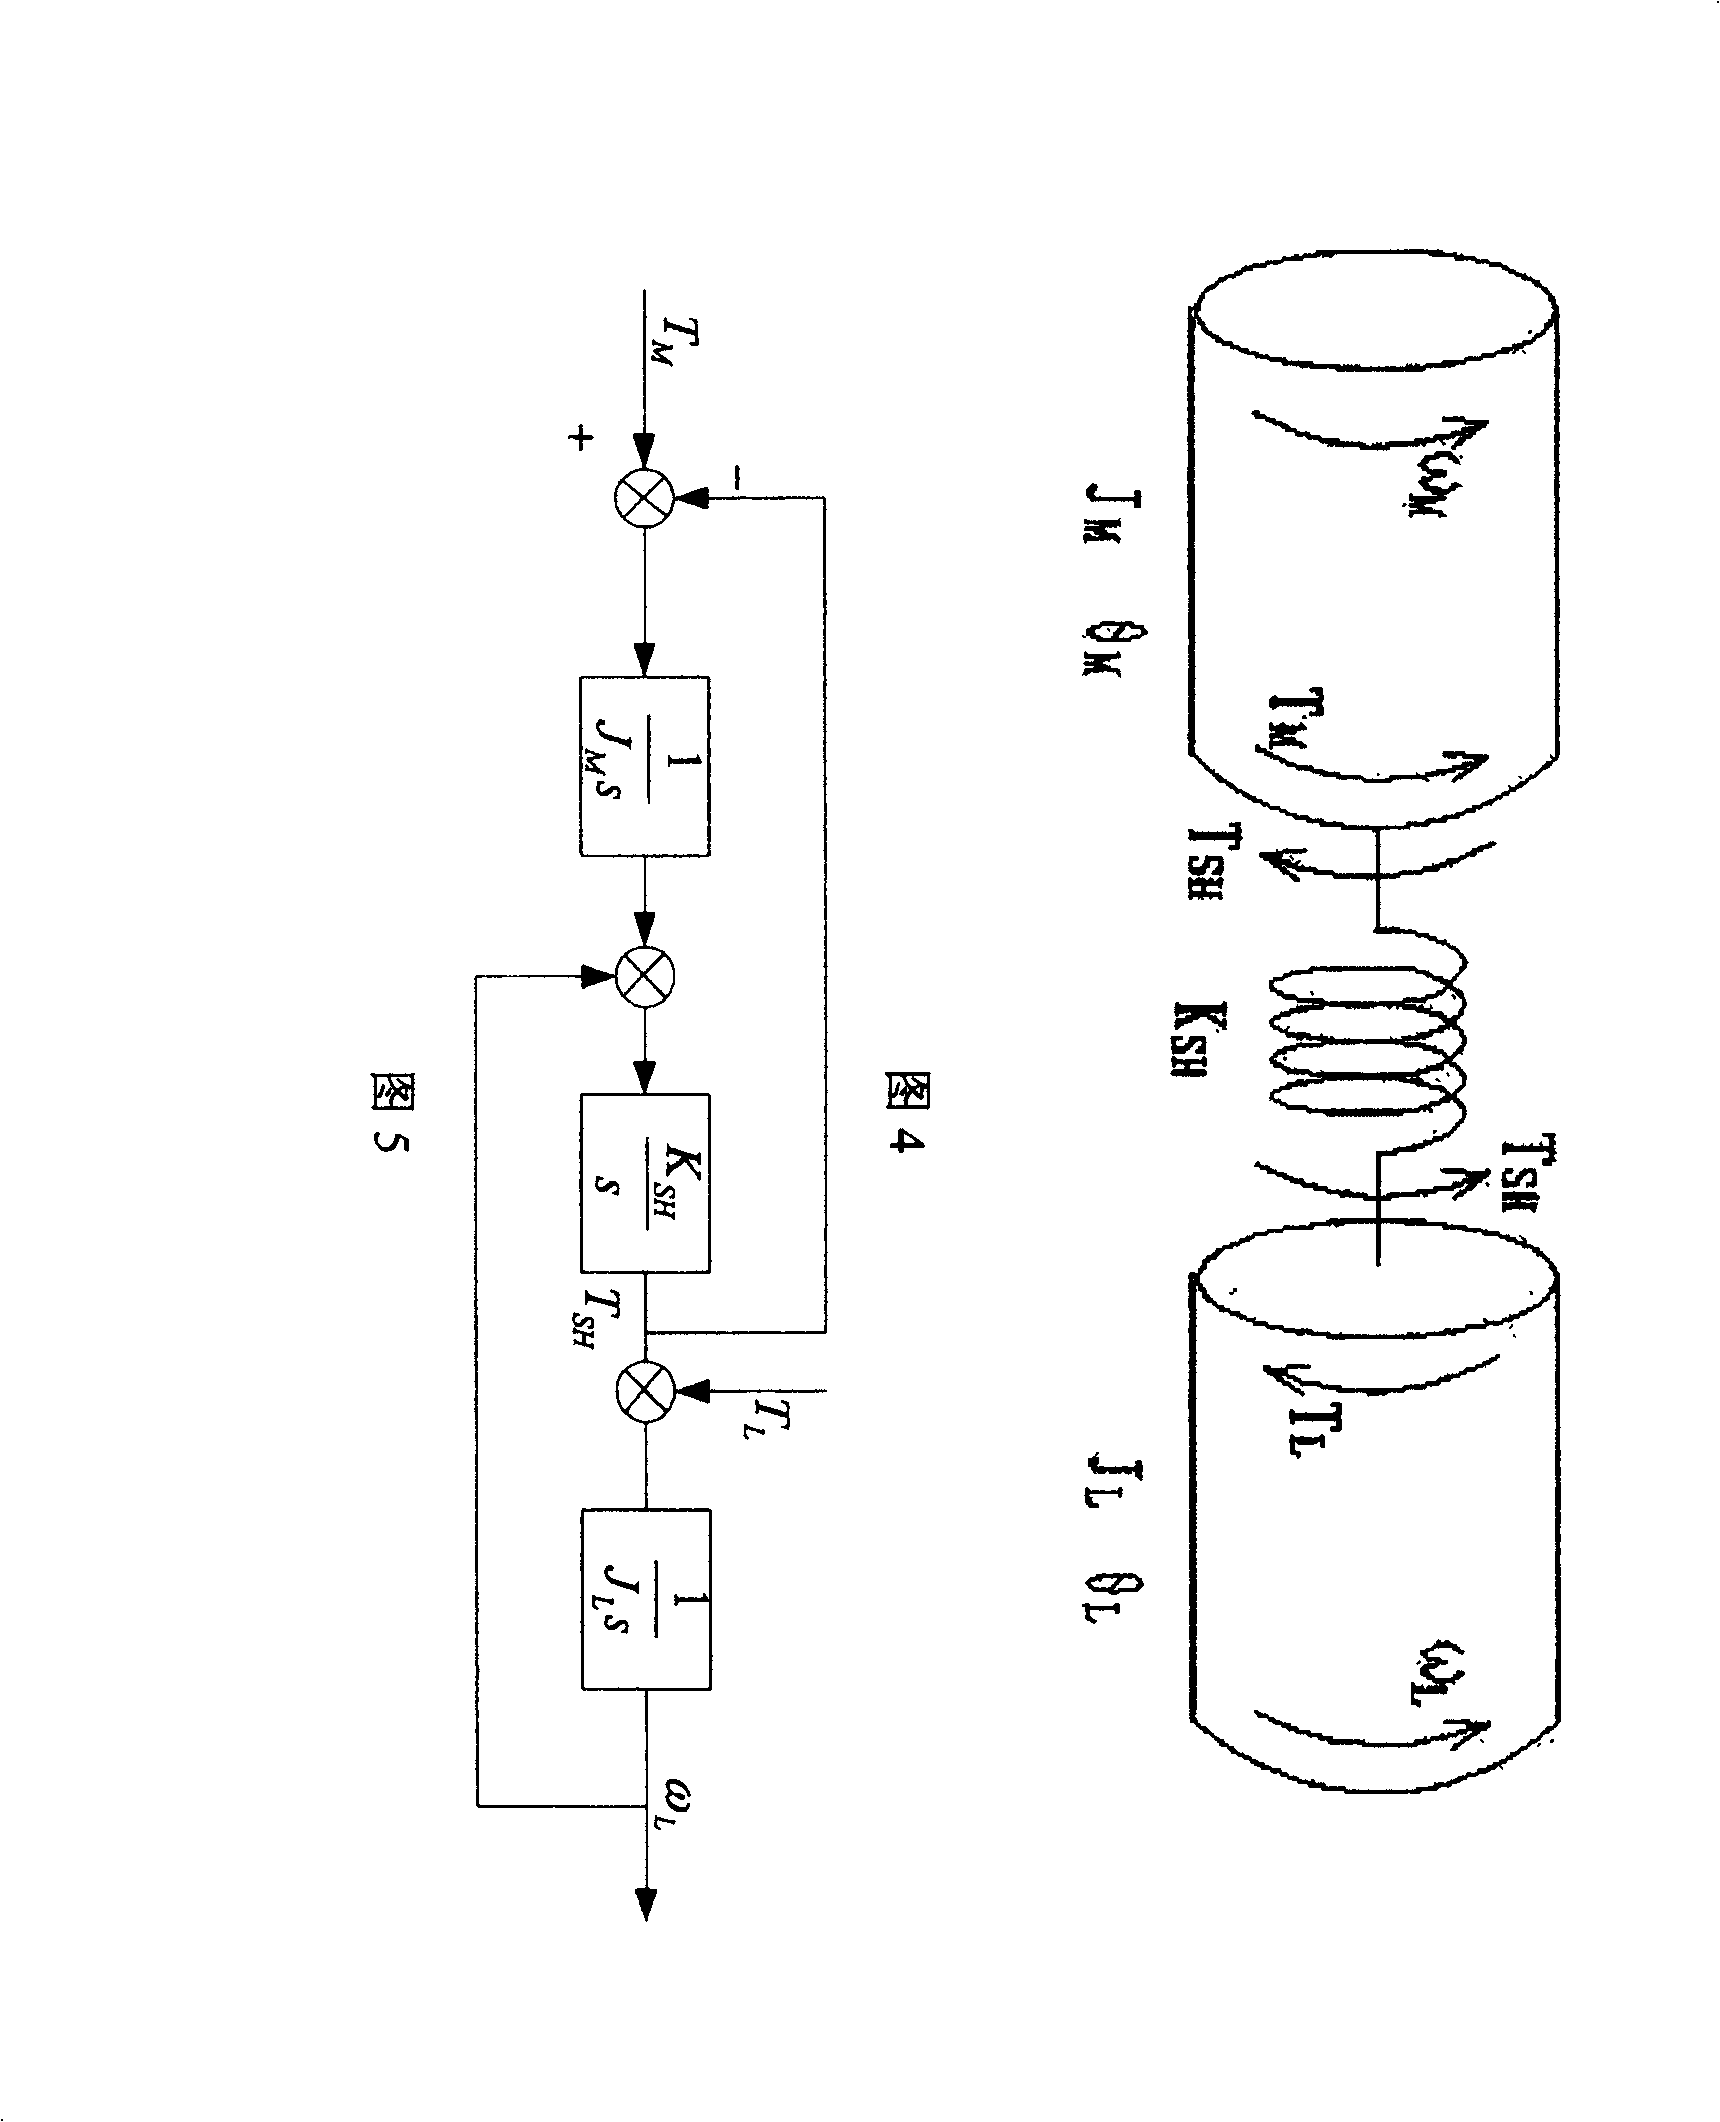 Control system for suppressing impact speed drop and torsional oscillation of rolling mill transmission system